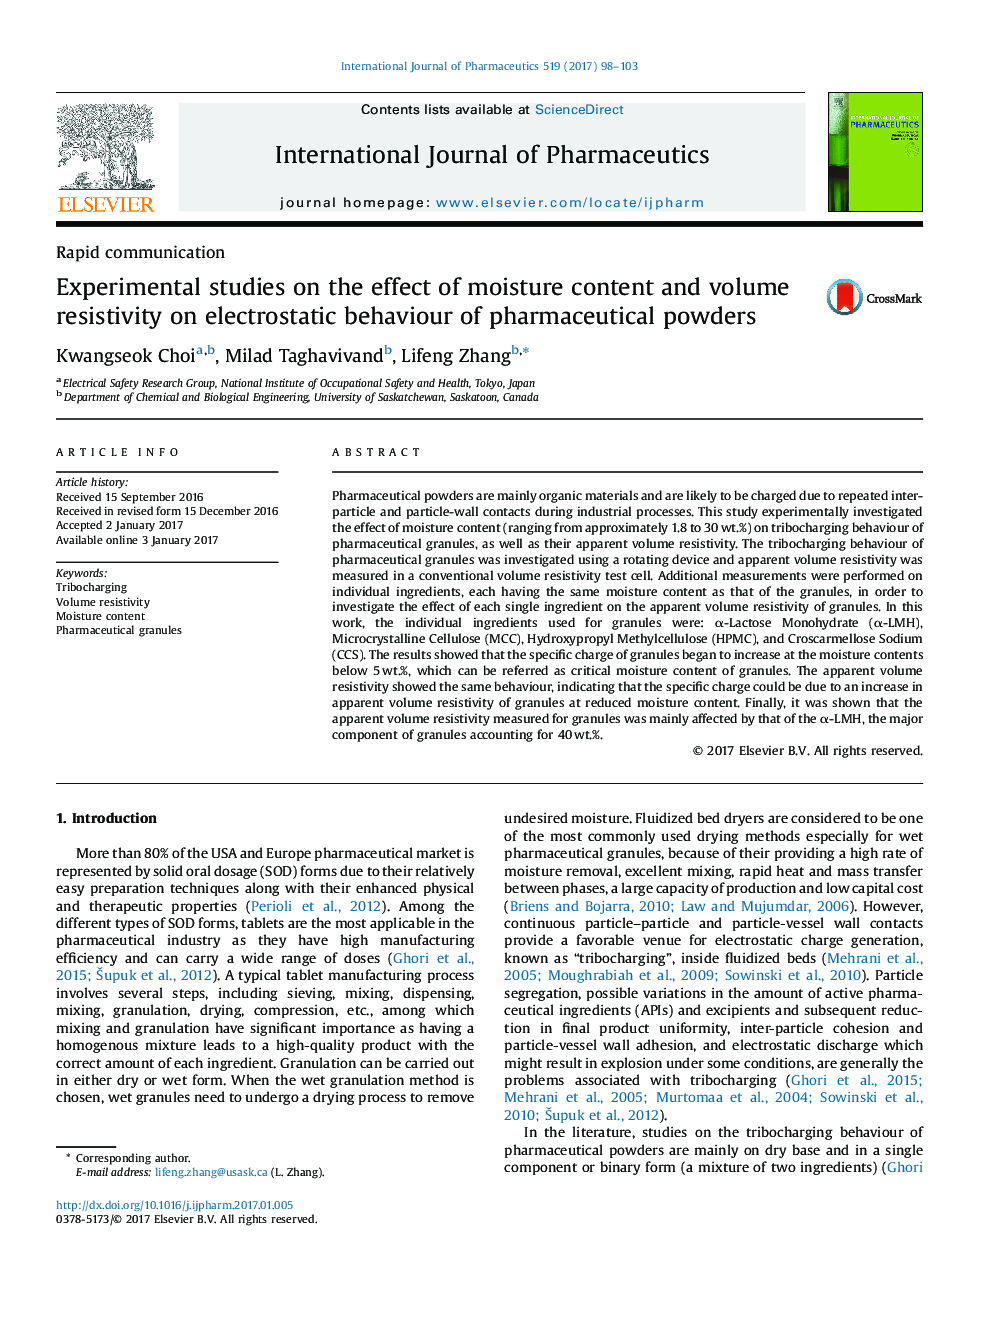 Experimental studies on the effect of moisture content and volume resistivity on electrostatic behaviour of pharmaceutical powders